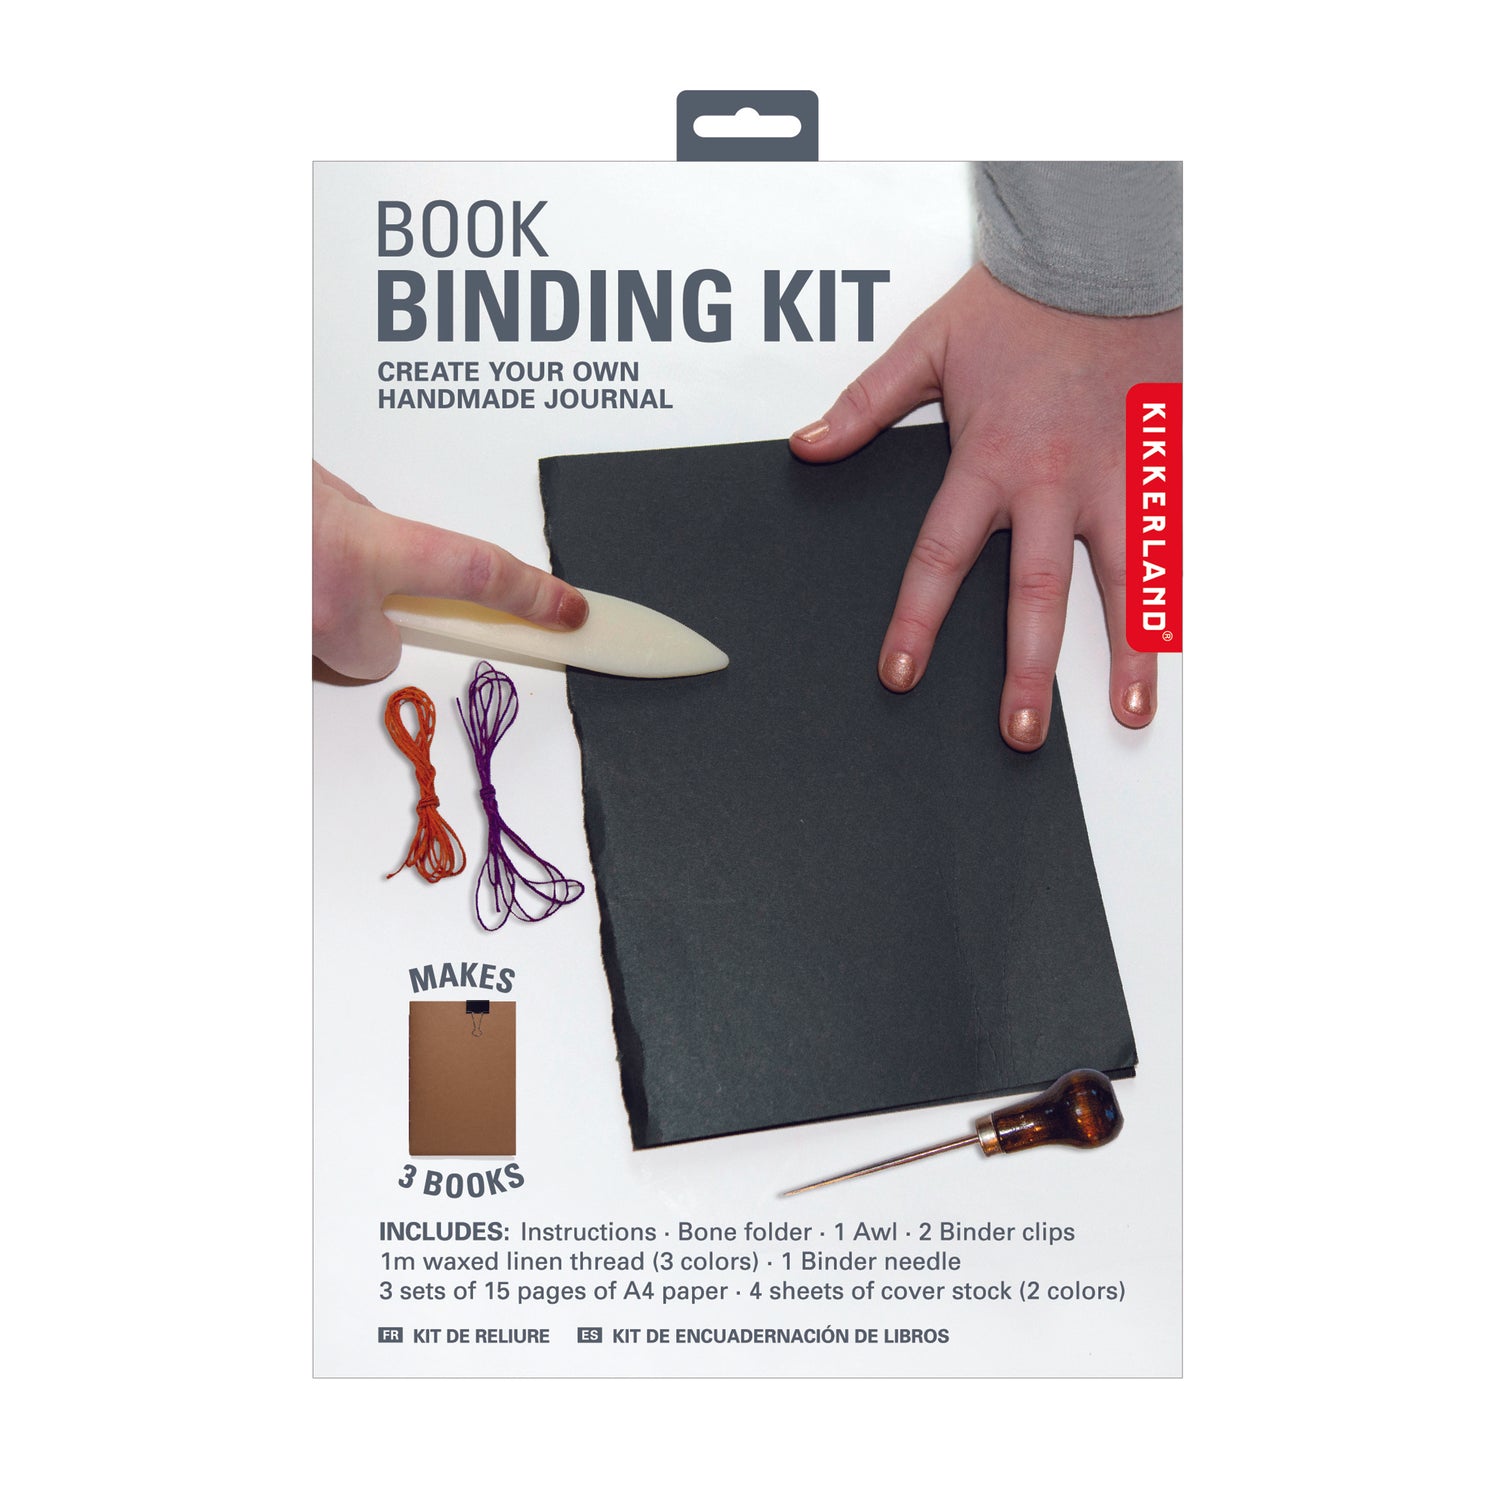 Designed by Me Blank Cover Journal Bookbinding Kit